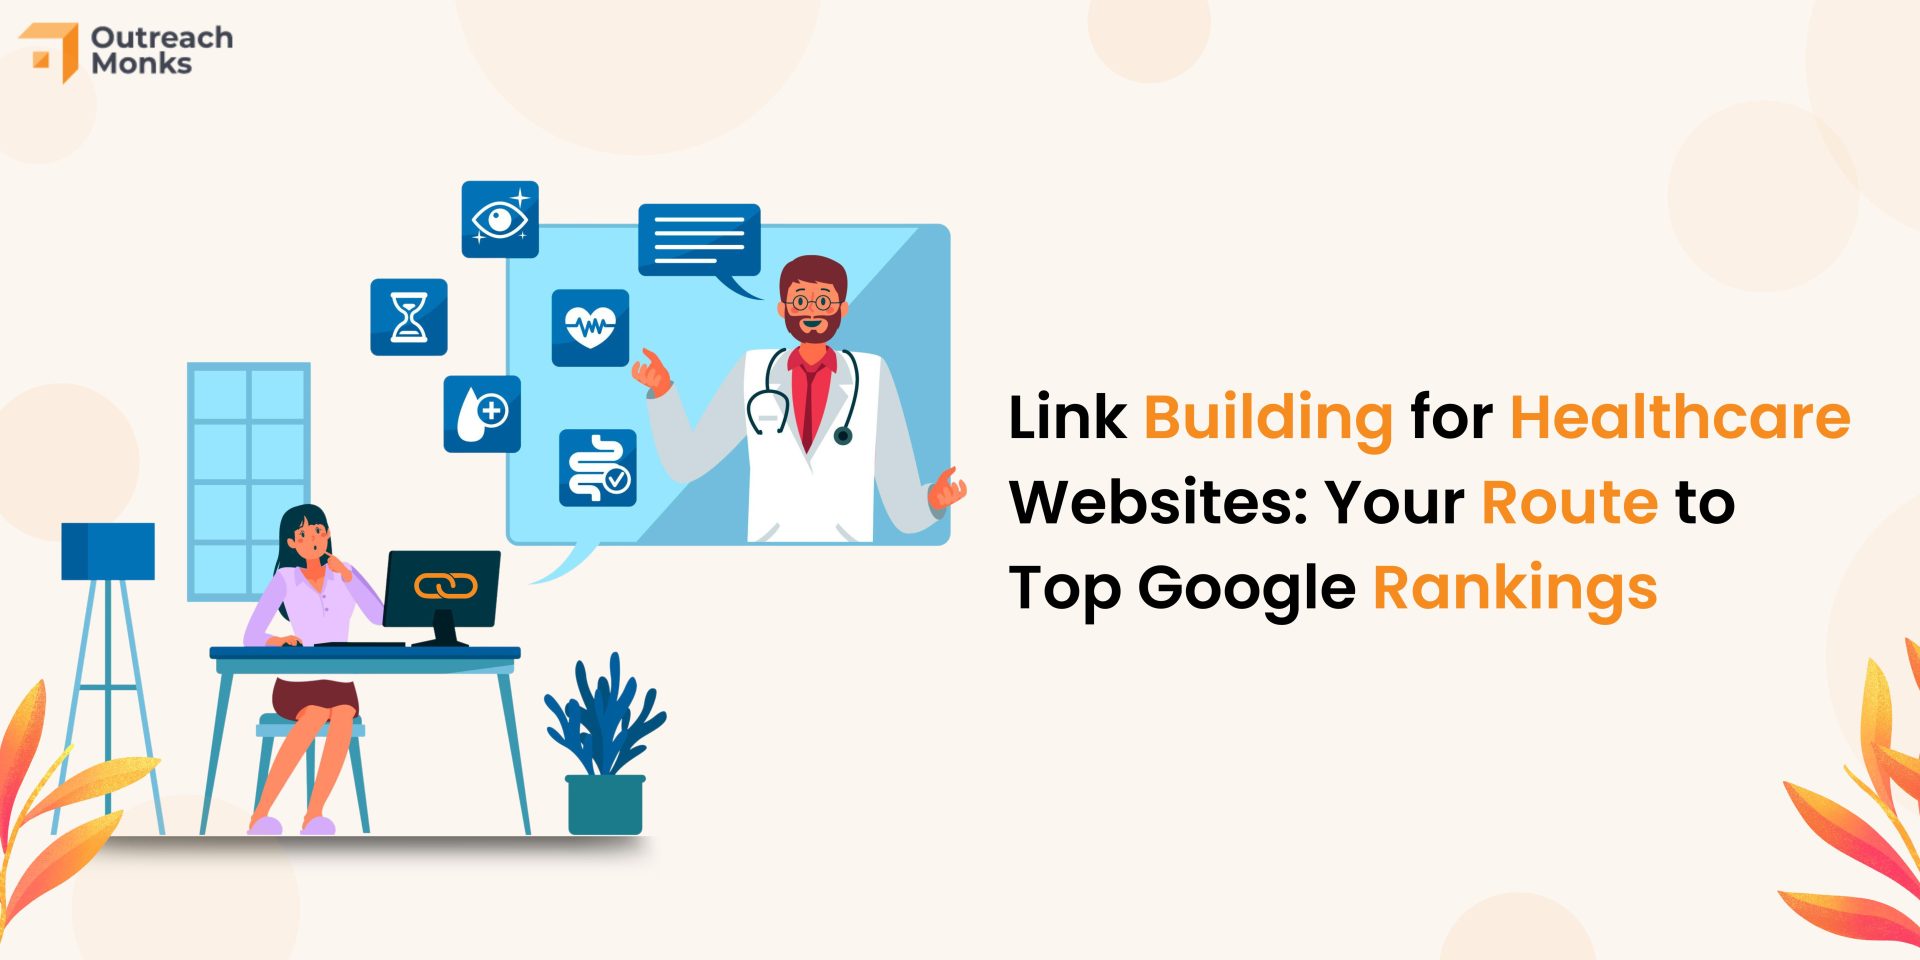 Link Building for Healthcare Websites: Your Route to Top Google Rankings